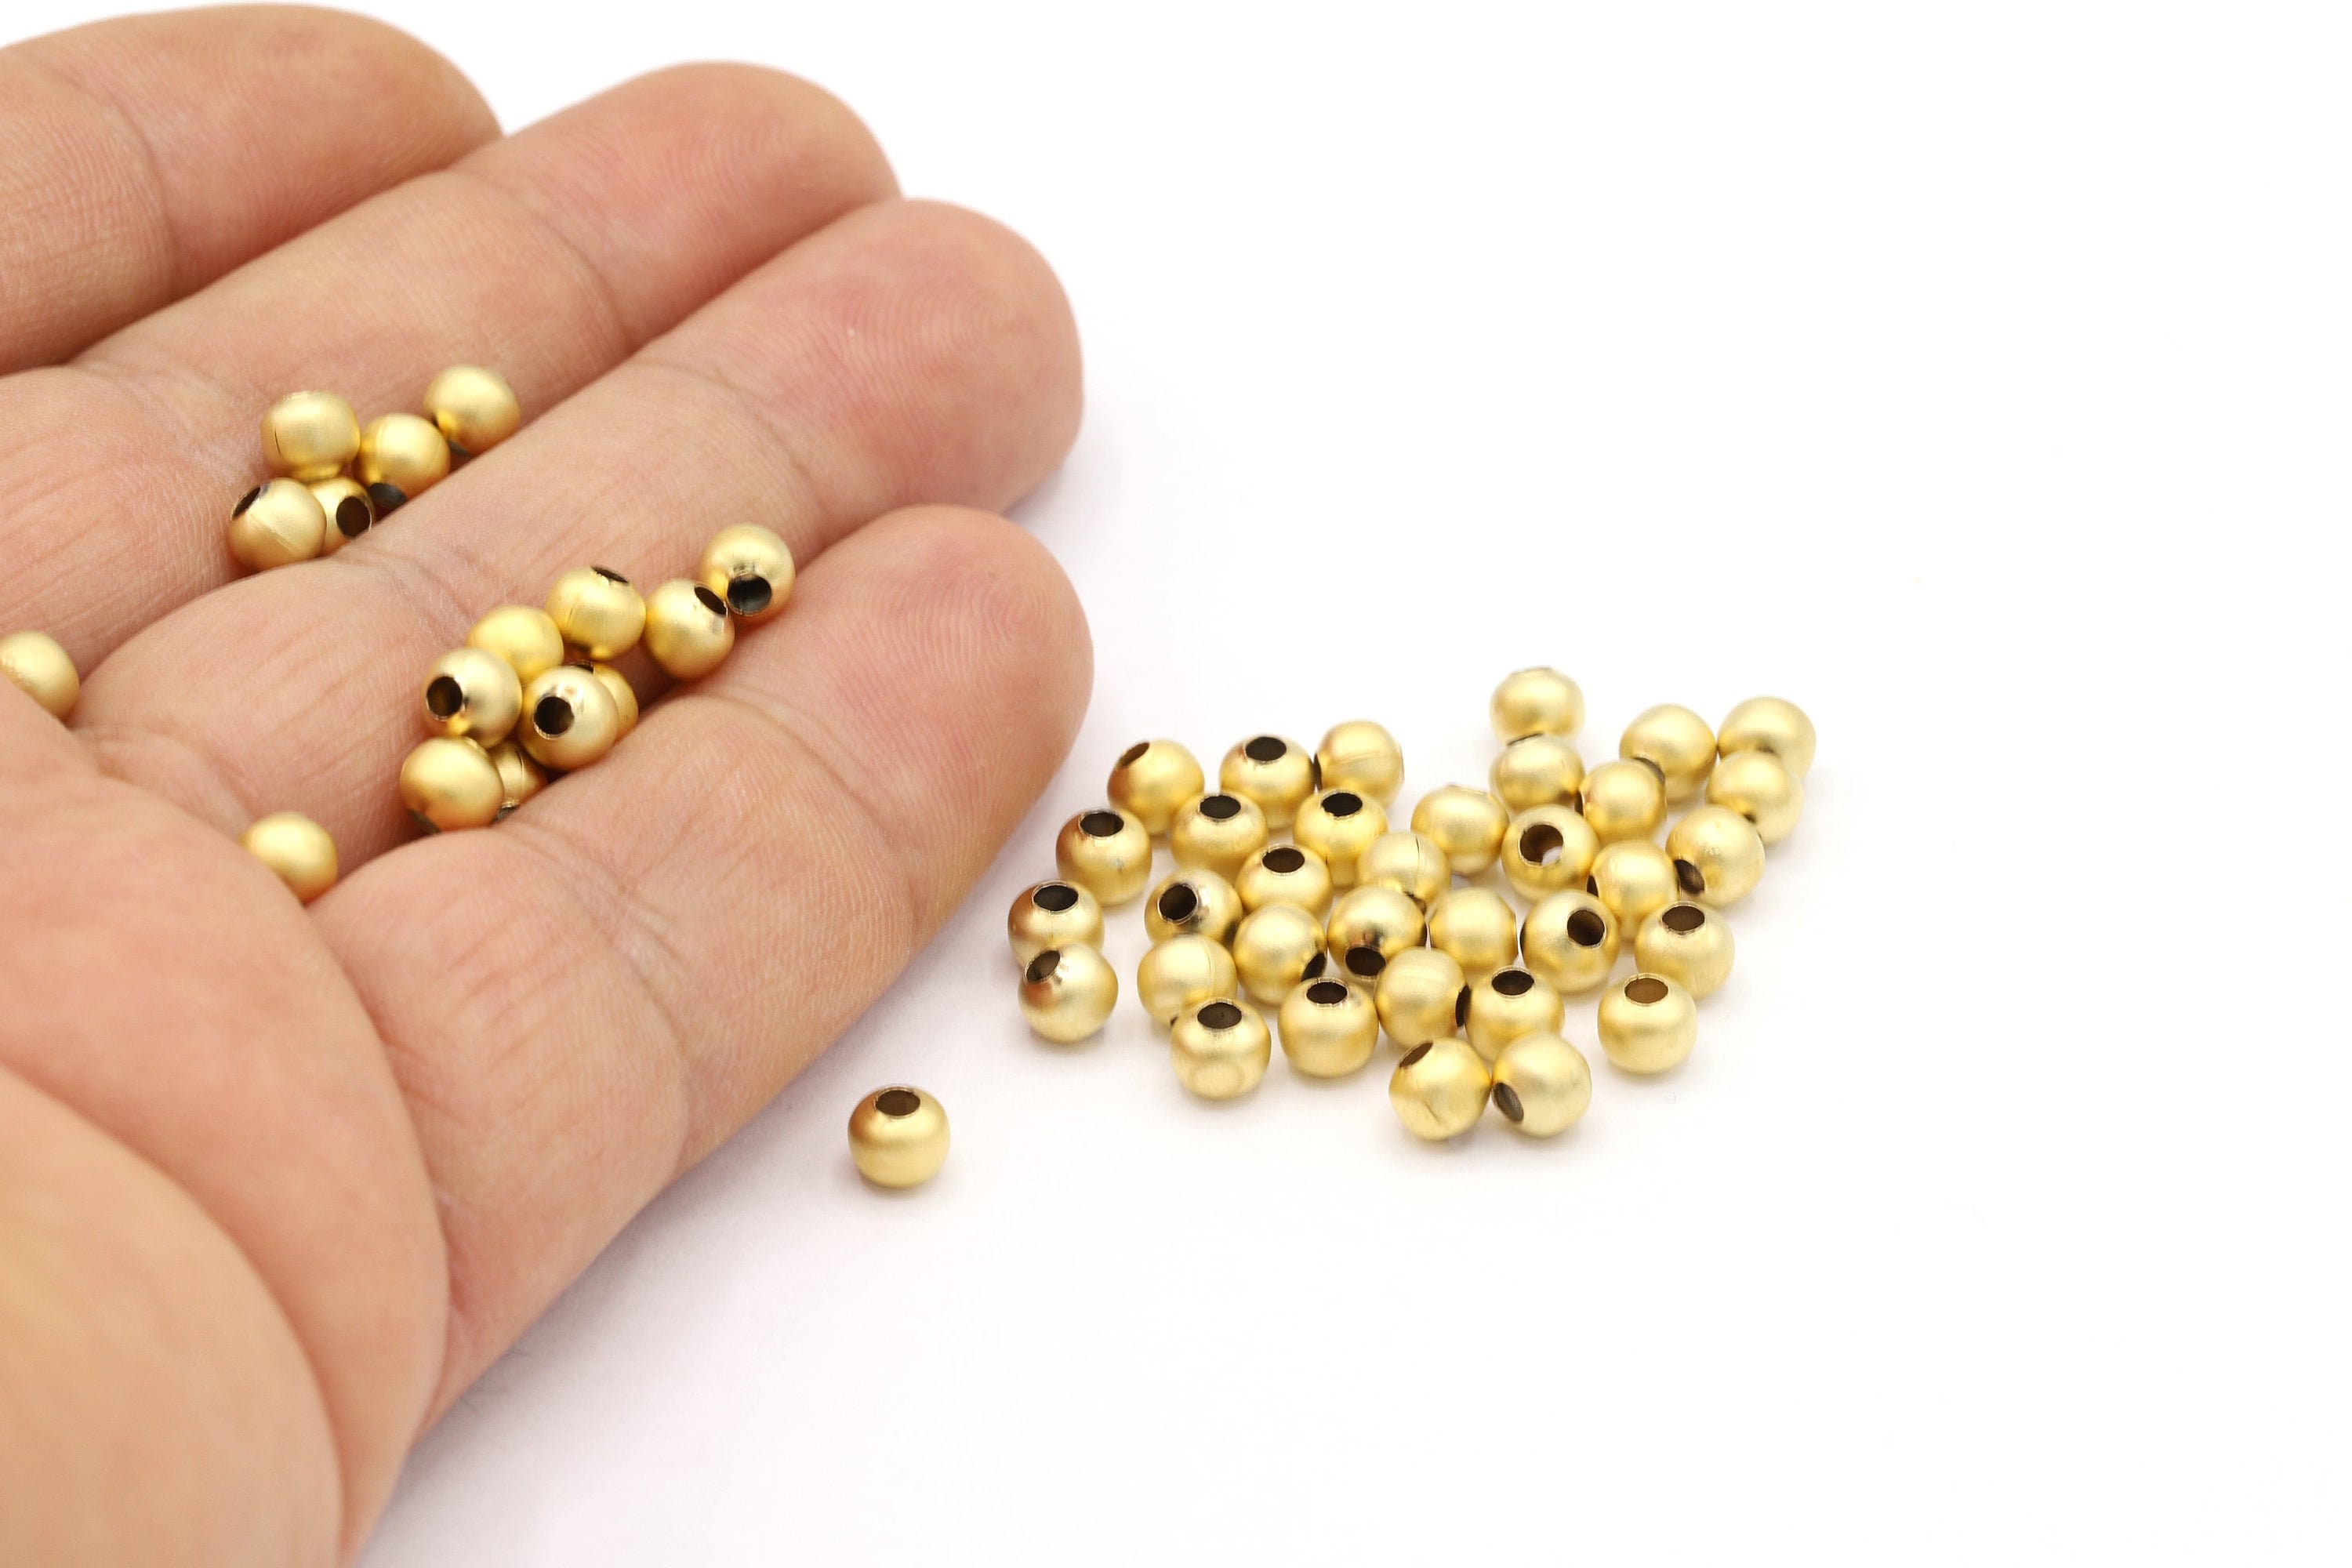 Gold Ball Spacer Beads, Mini Round Beads, Rustic Ball Bead, Gold Spacer  Bead Findings, Turkish Jewelry, 8mm Ball Beads, 10pc 